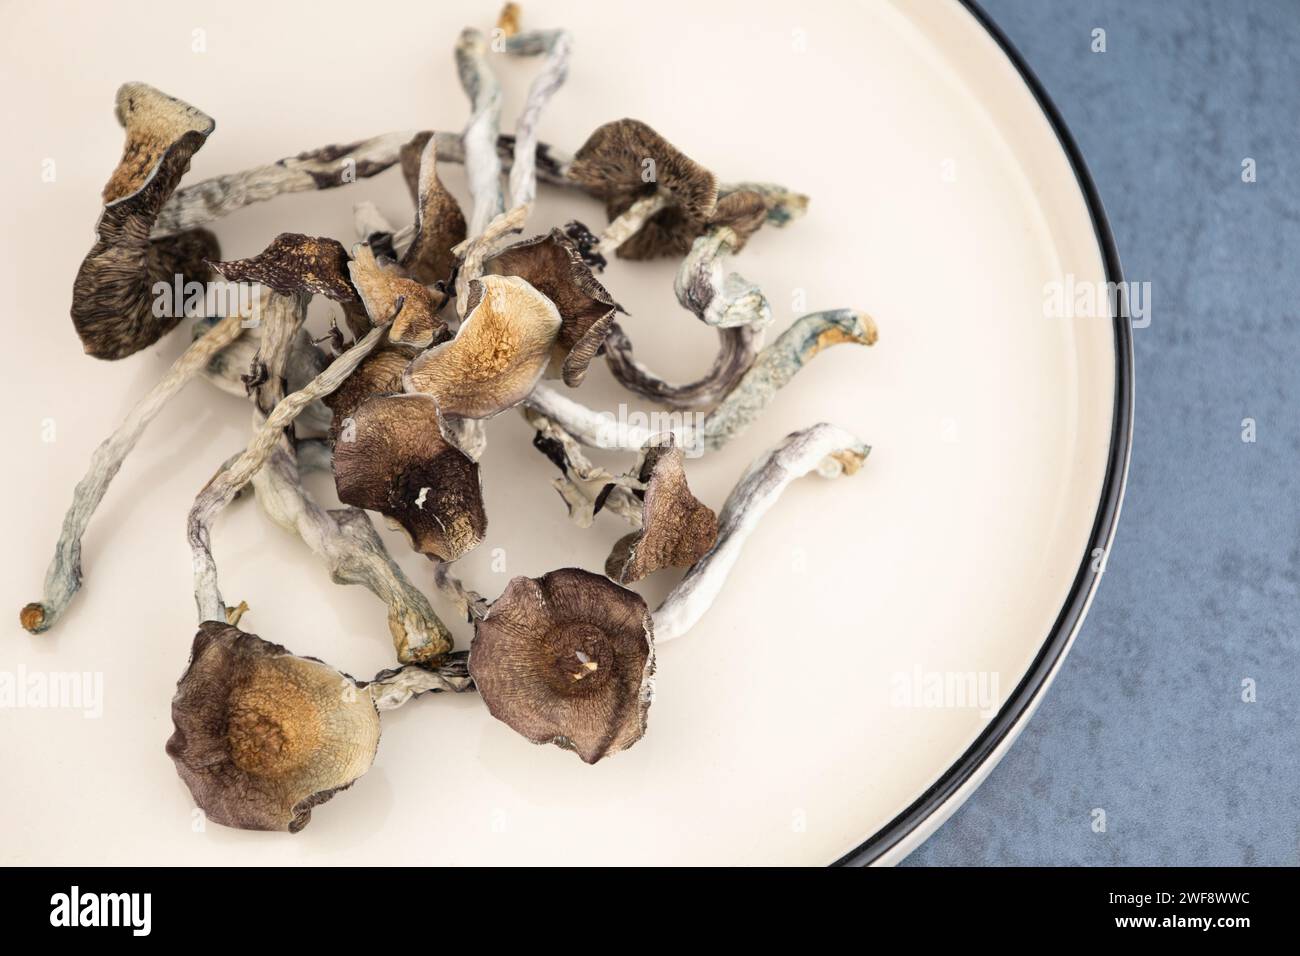 A number of dried mushrooms of the species Psilocybe cubensis Argentina lie on a beige plate.  On a gray background.  Alternative medicine, treatment Stock Photo